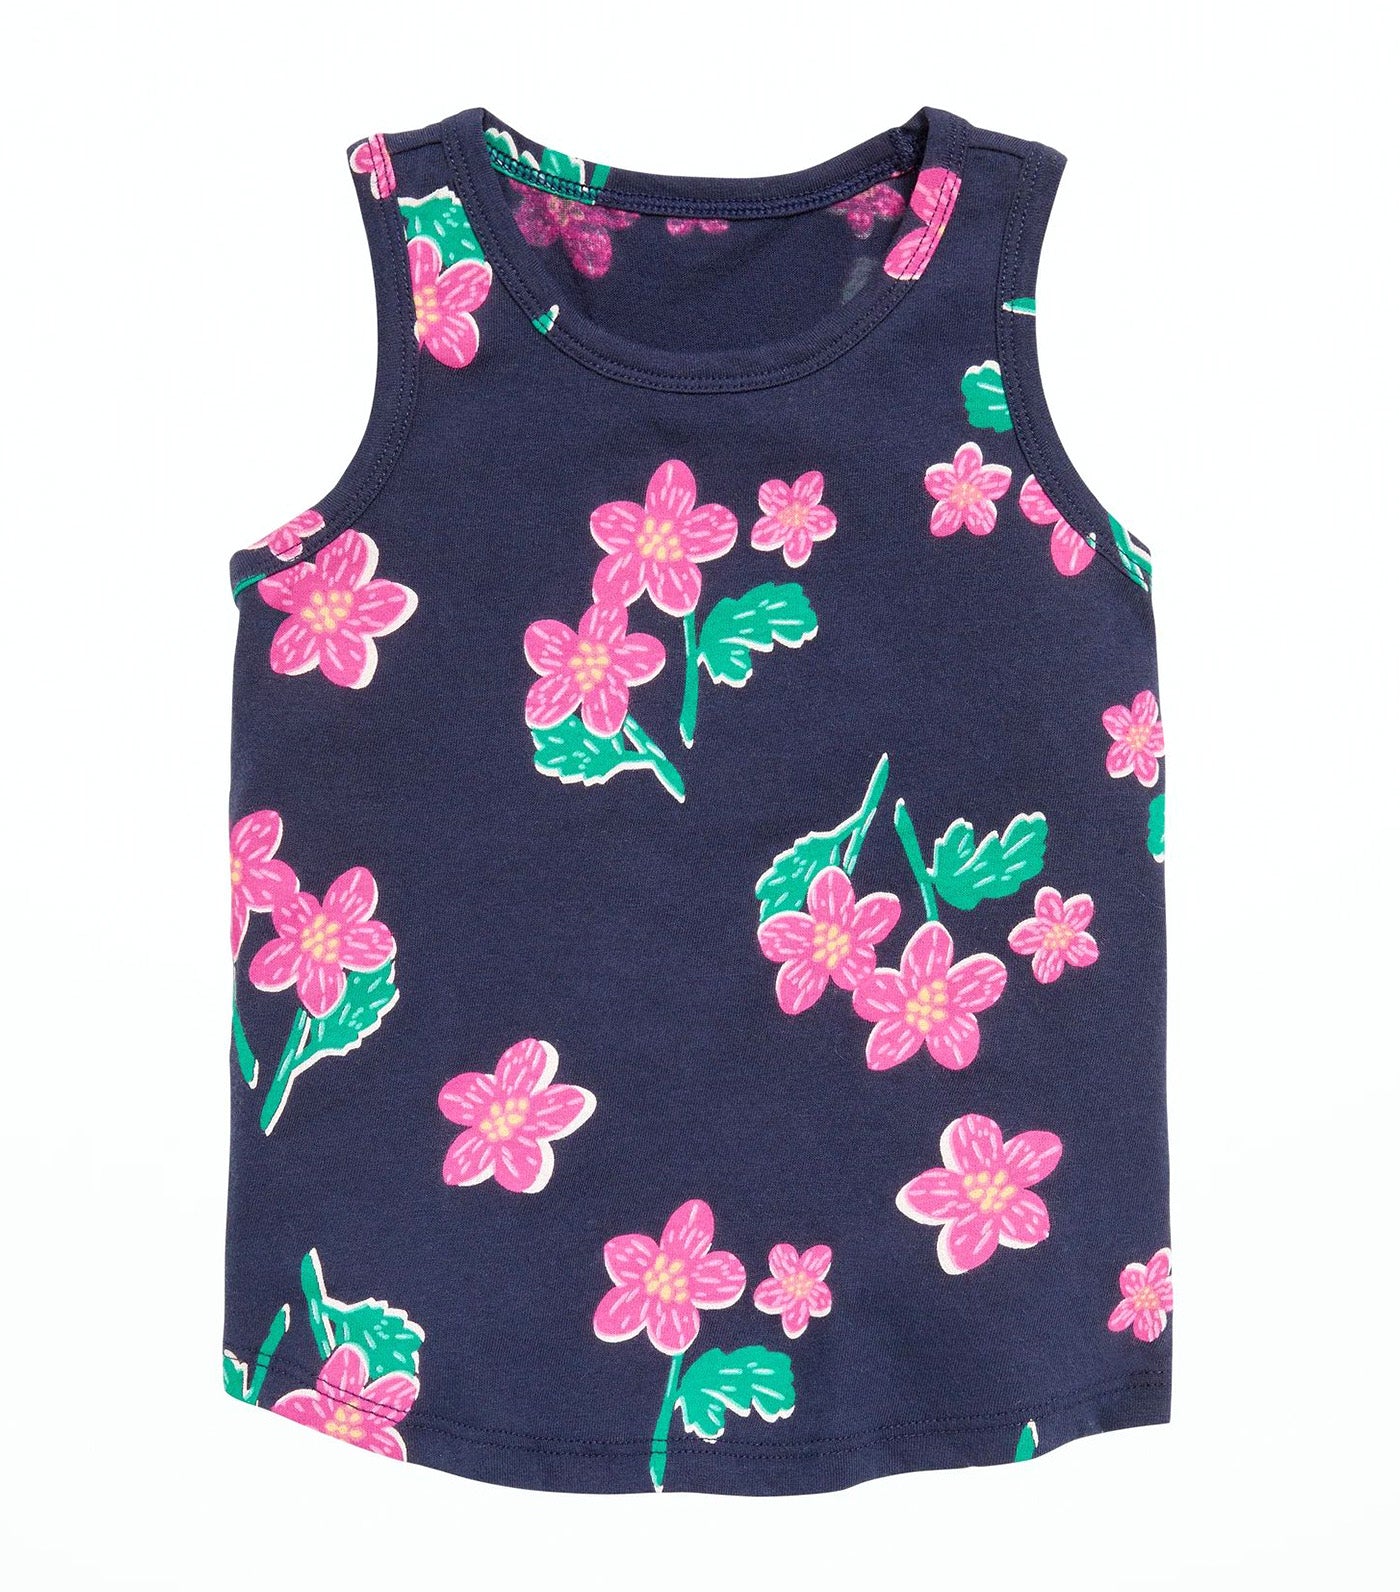 Printed Tank Top for Toddler Girls - Navy Floral